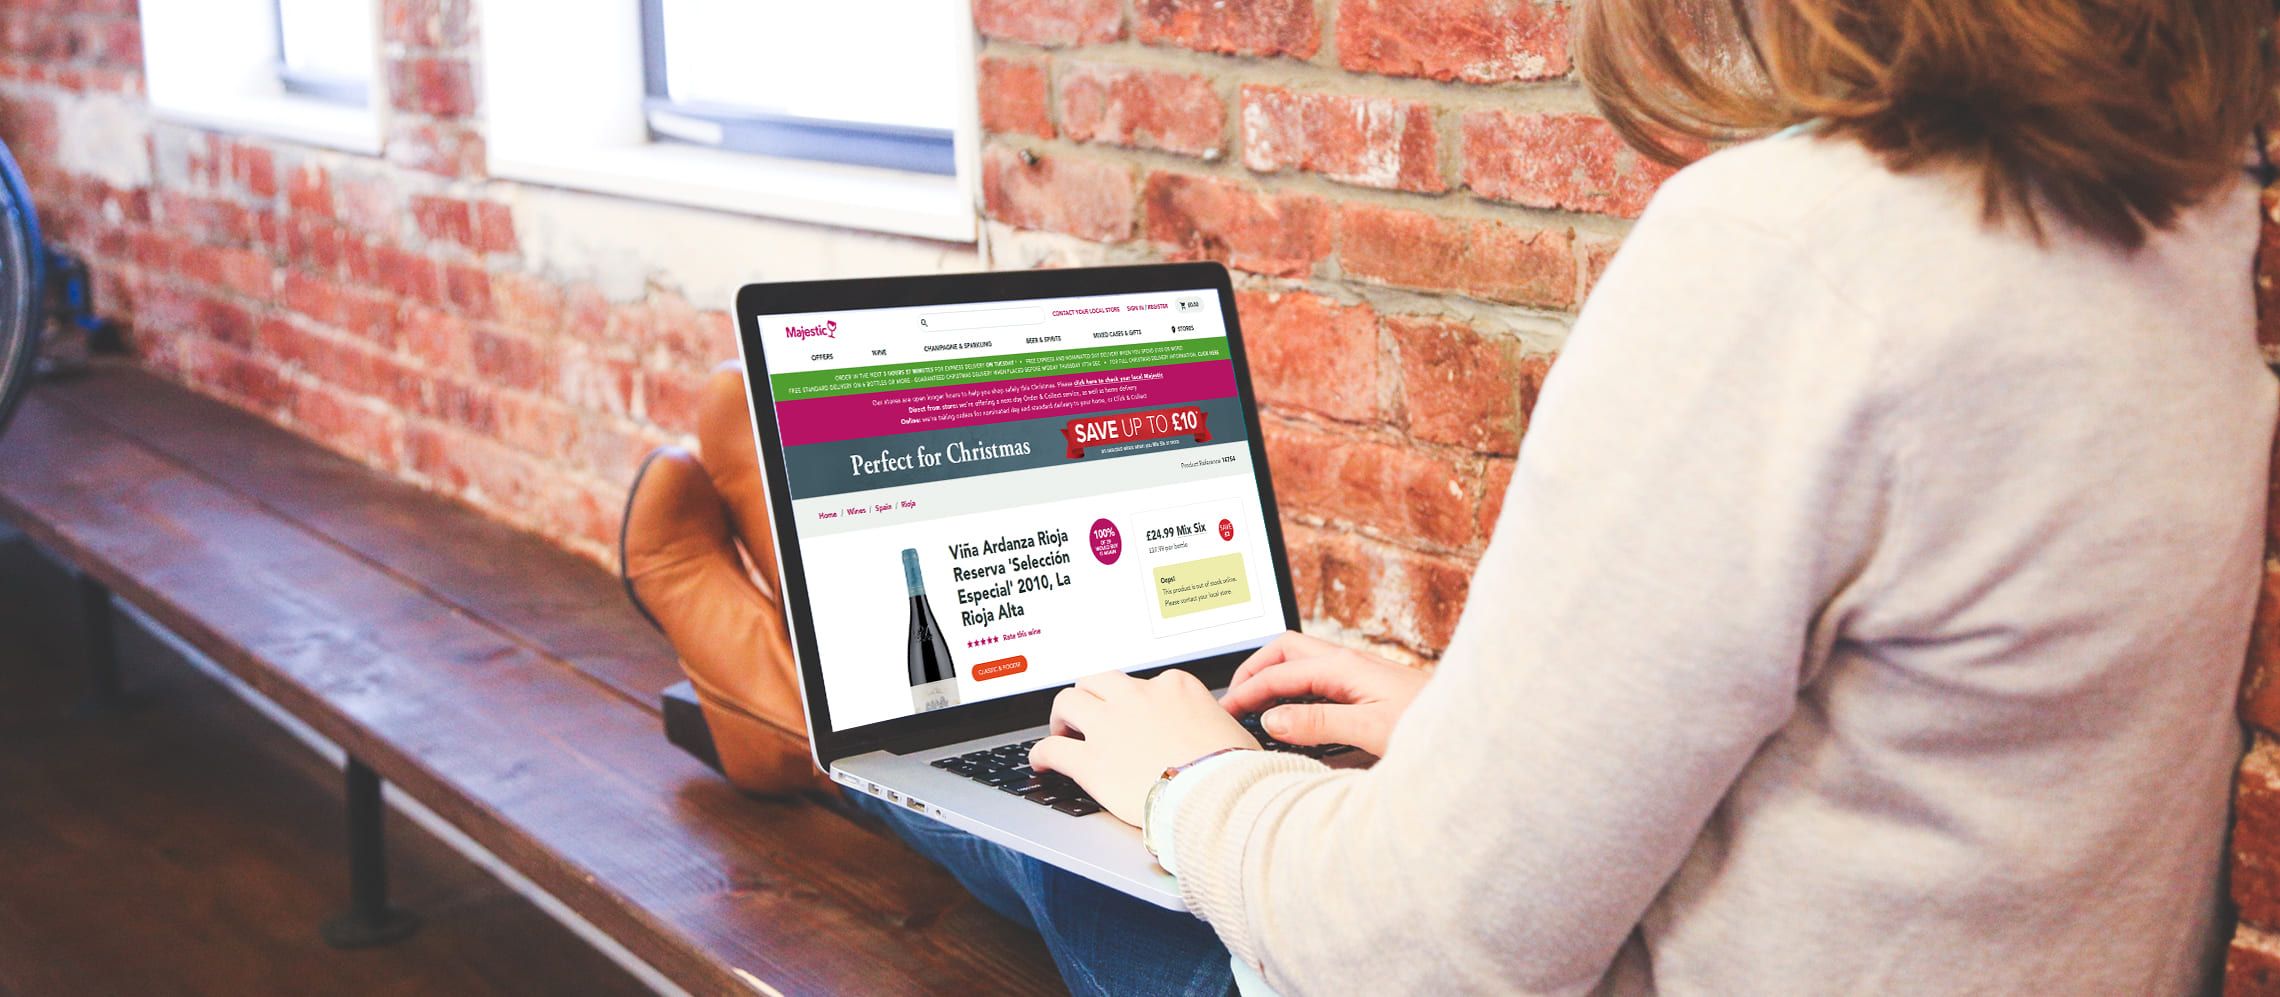 Photo for: Where Can You Find The Best Online Wine Deals In London?